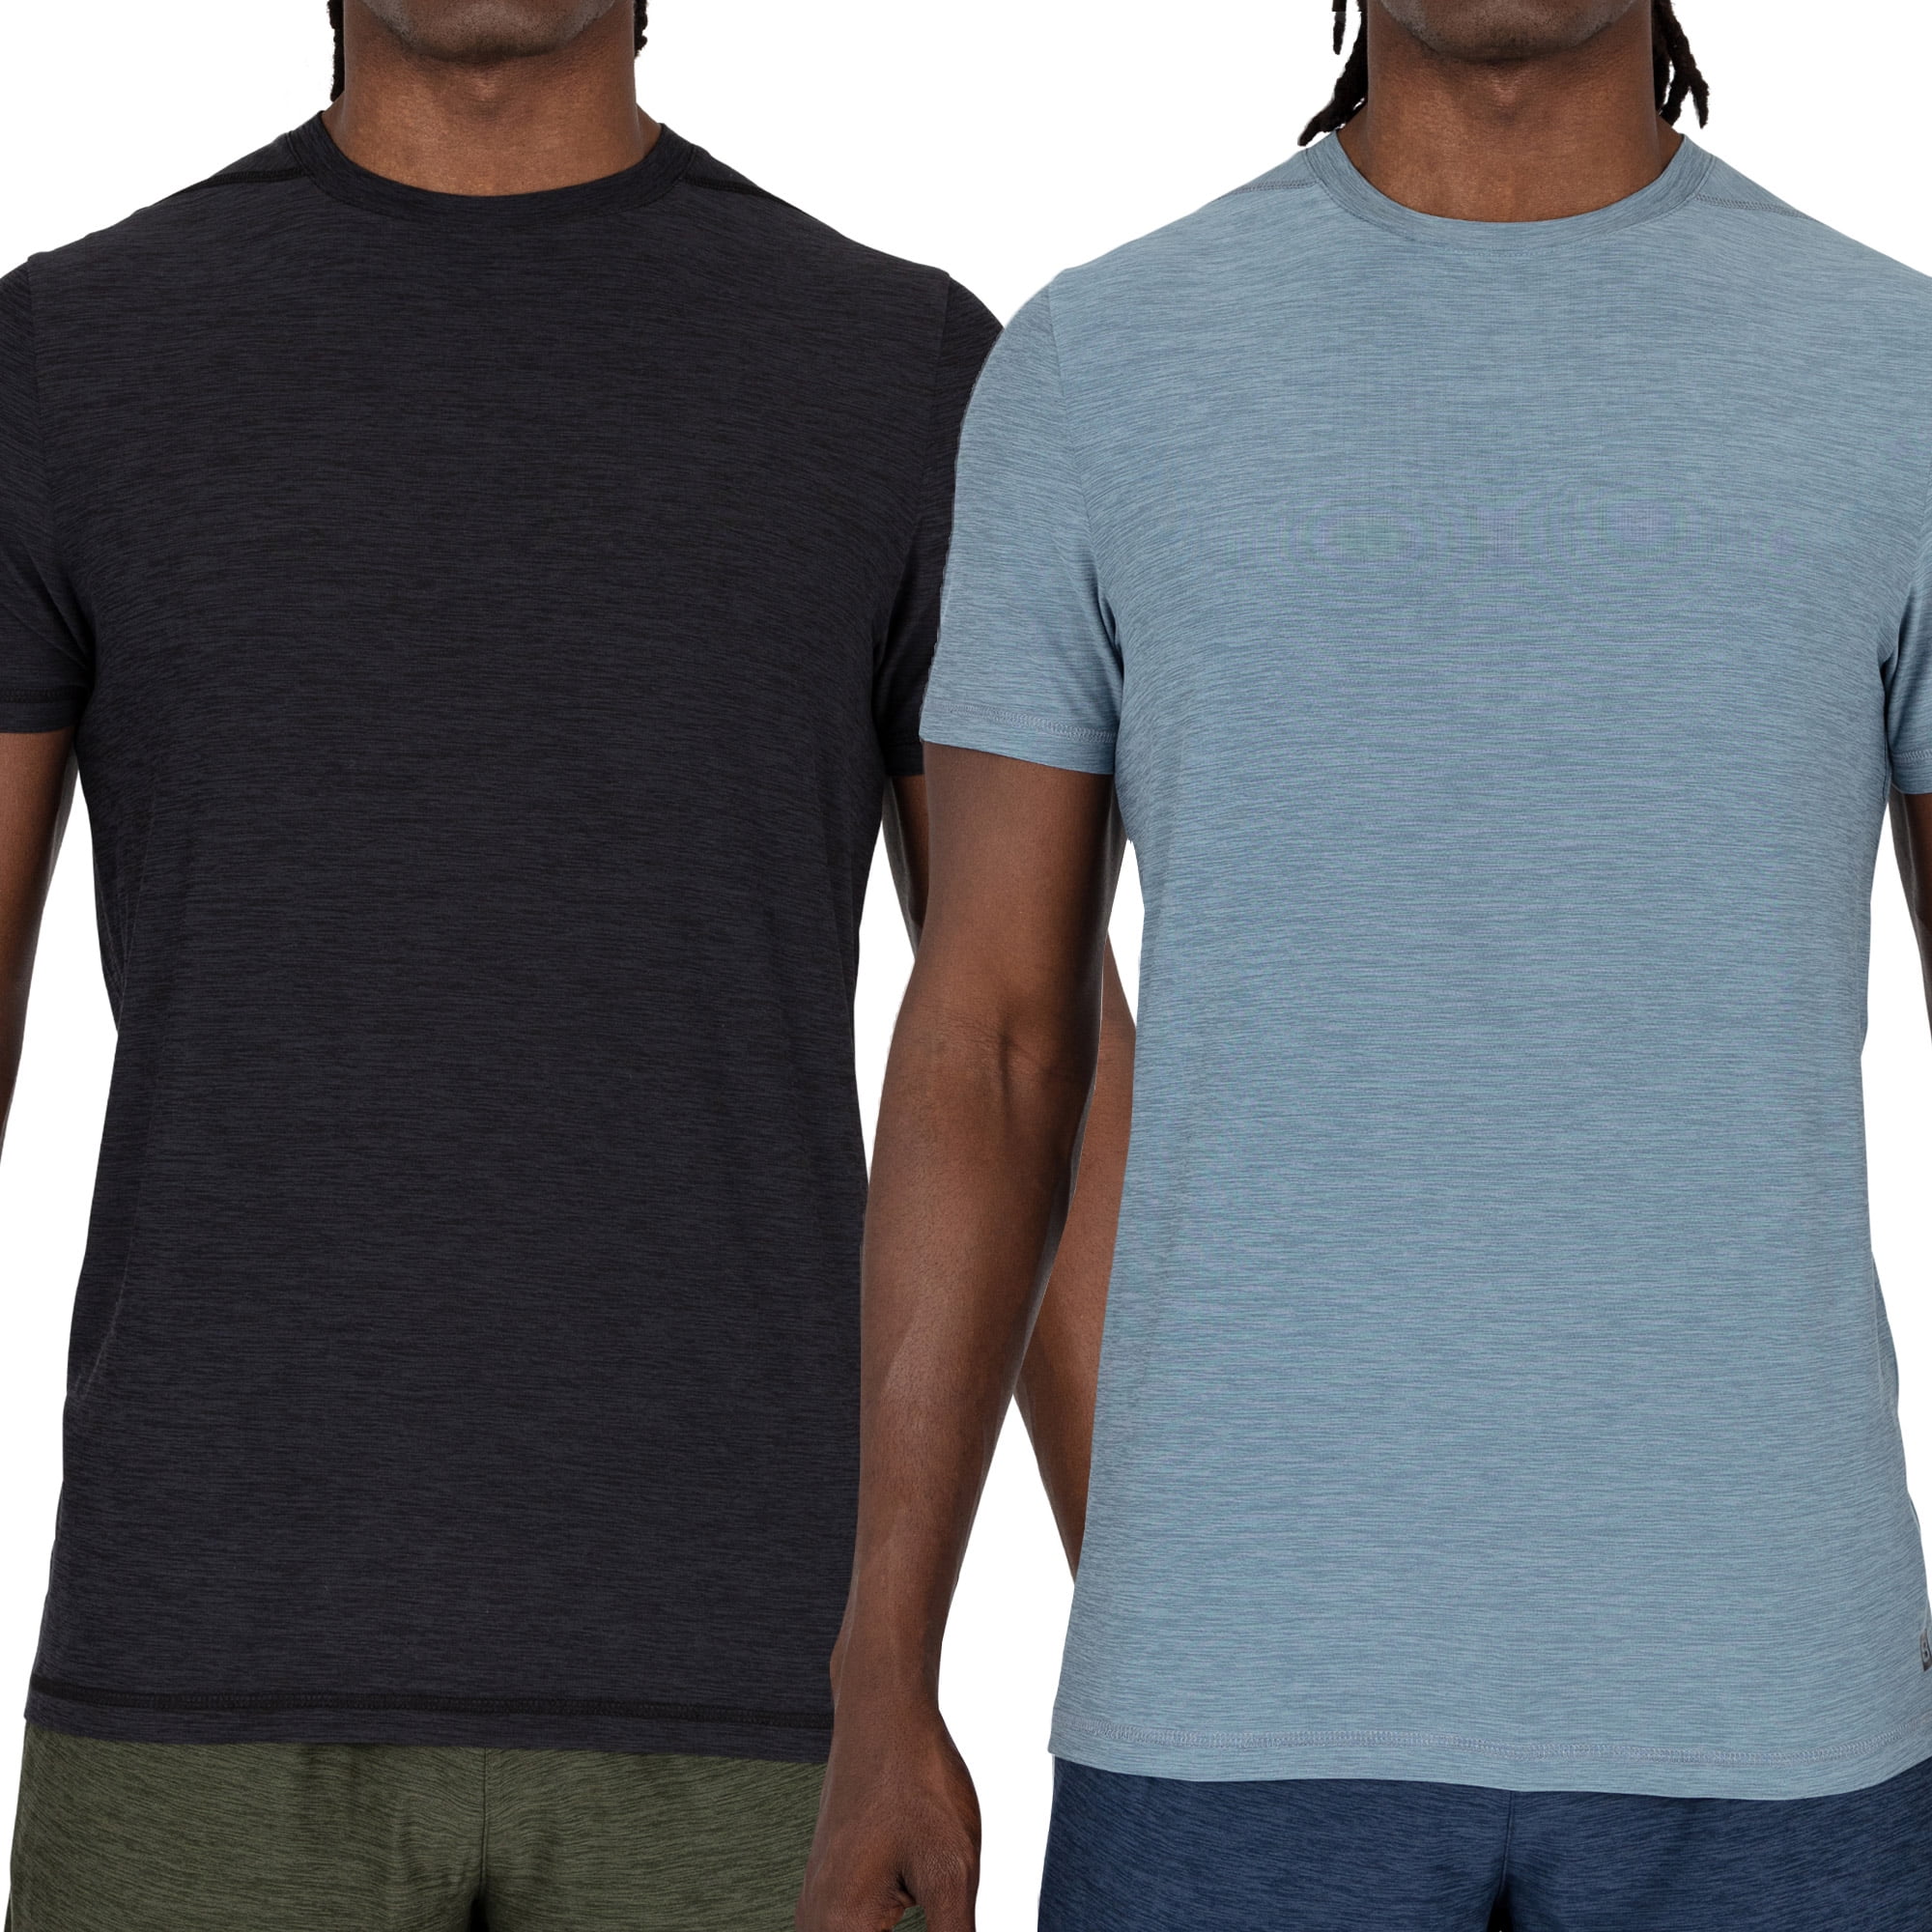 Layer 8 Men's 2 Pack Shirts- Moisture Wicking Performance Workout Tee ...